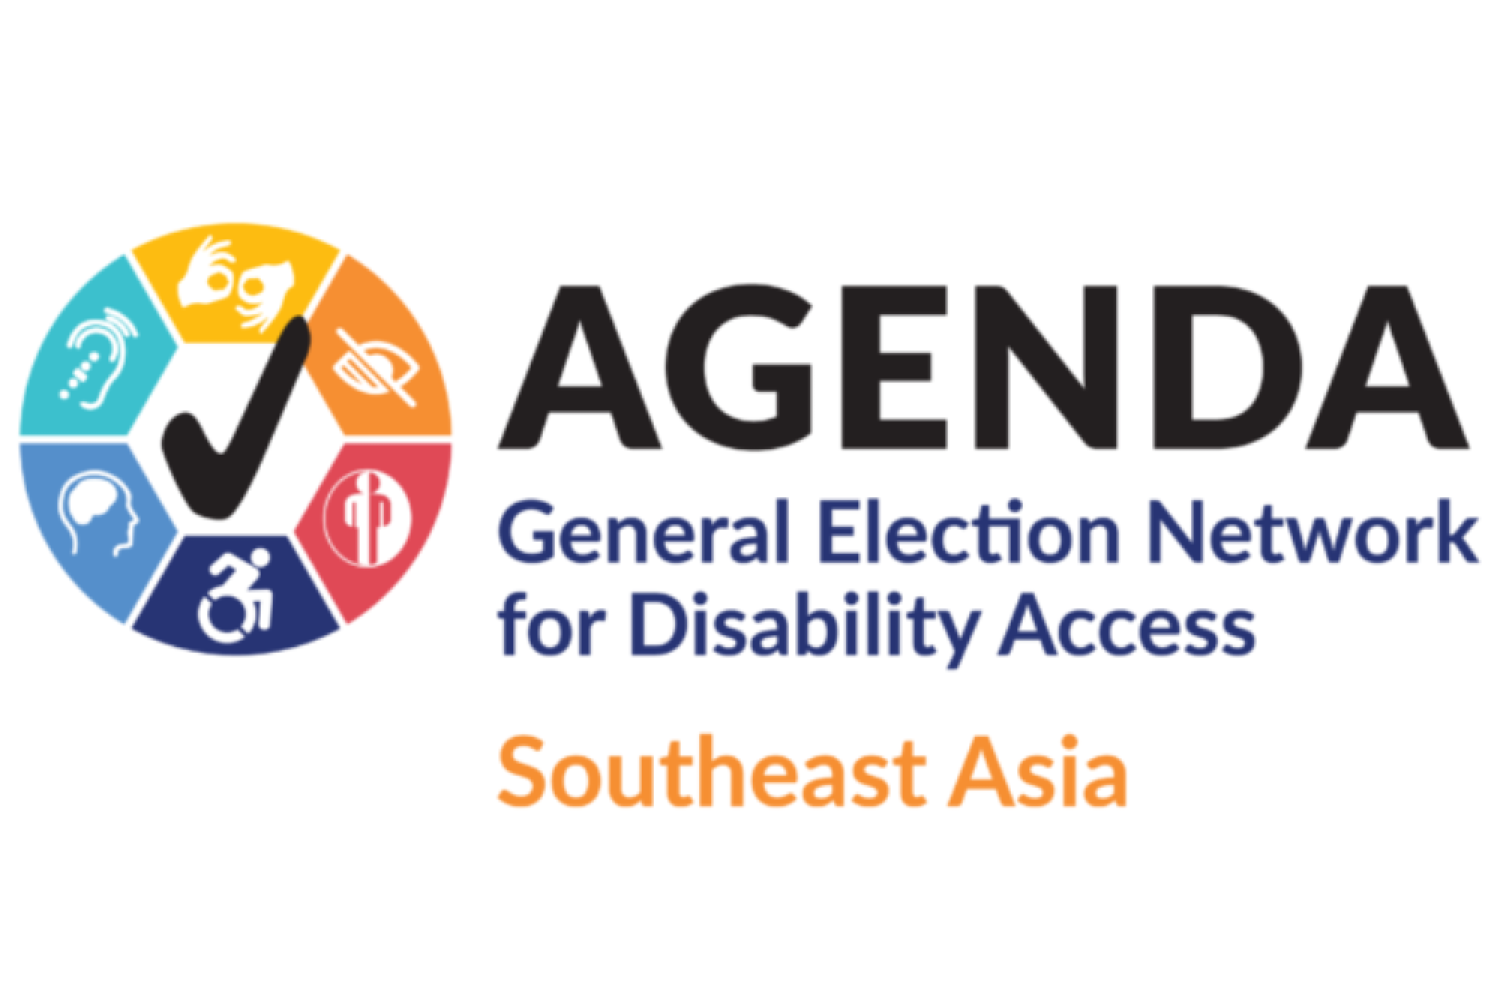 AGENDA logo: a multicolor wheel with six small icons and a large checkmark in the middle. To the right of the wheel, black text reading, "AGENDA." Under that, navy blue text reading "General Election Network for Disability Access." Under that, orange text reading "Southeast Asia".